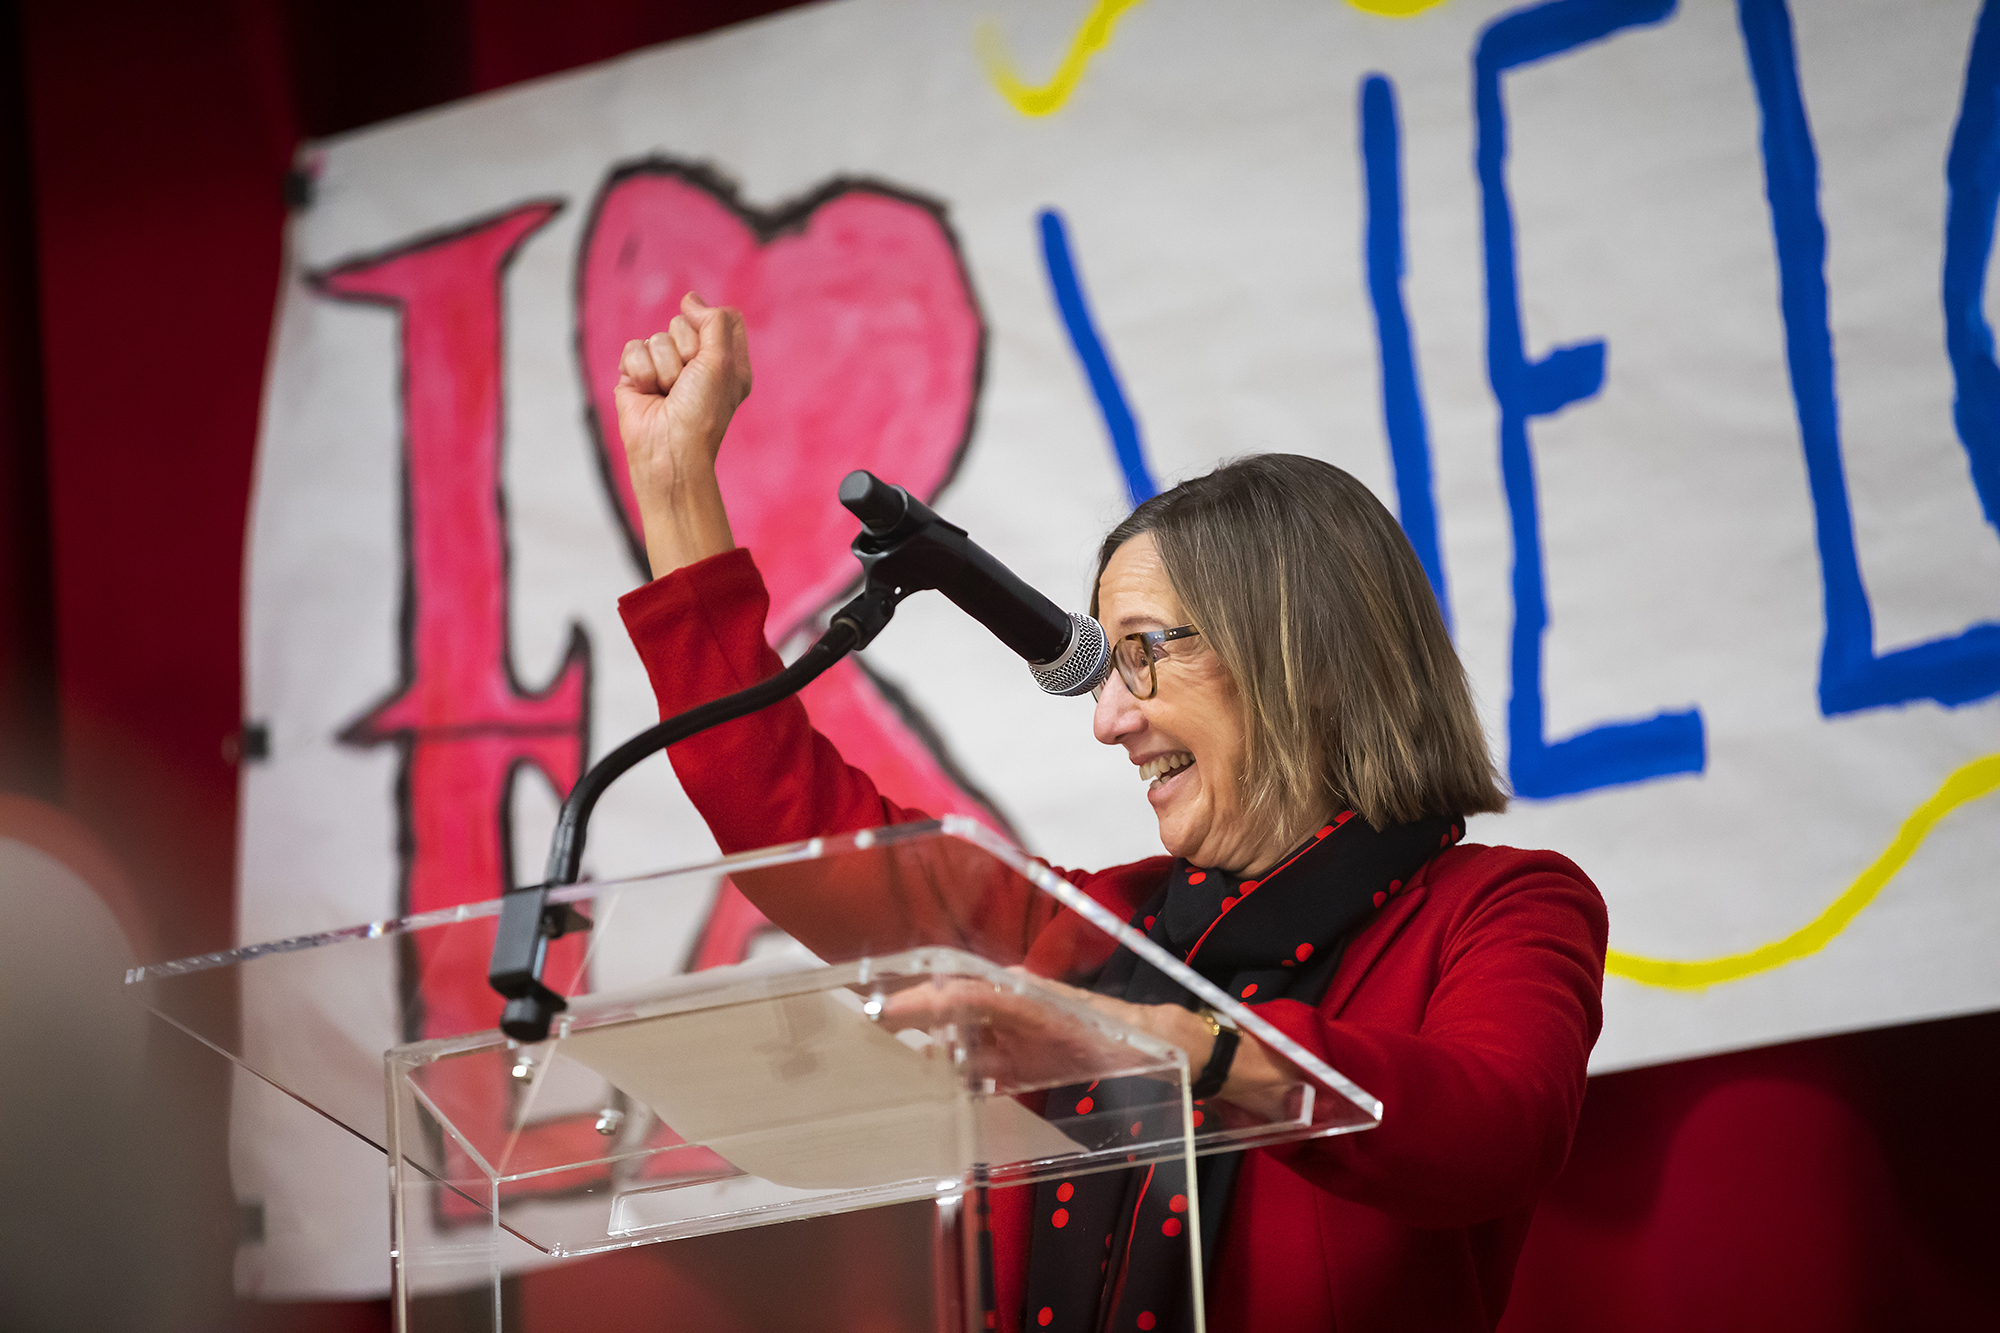 Dean Pam Grossman smiles and holds one arm up at podium